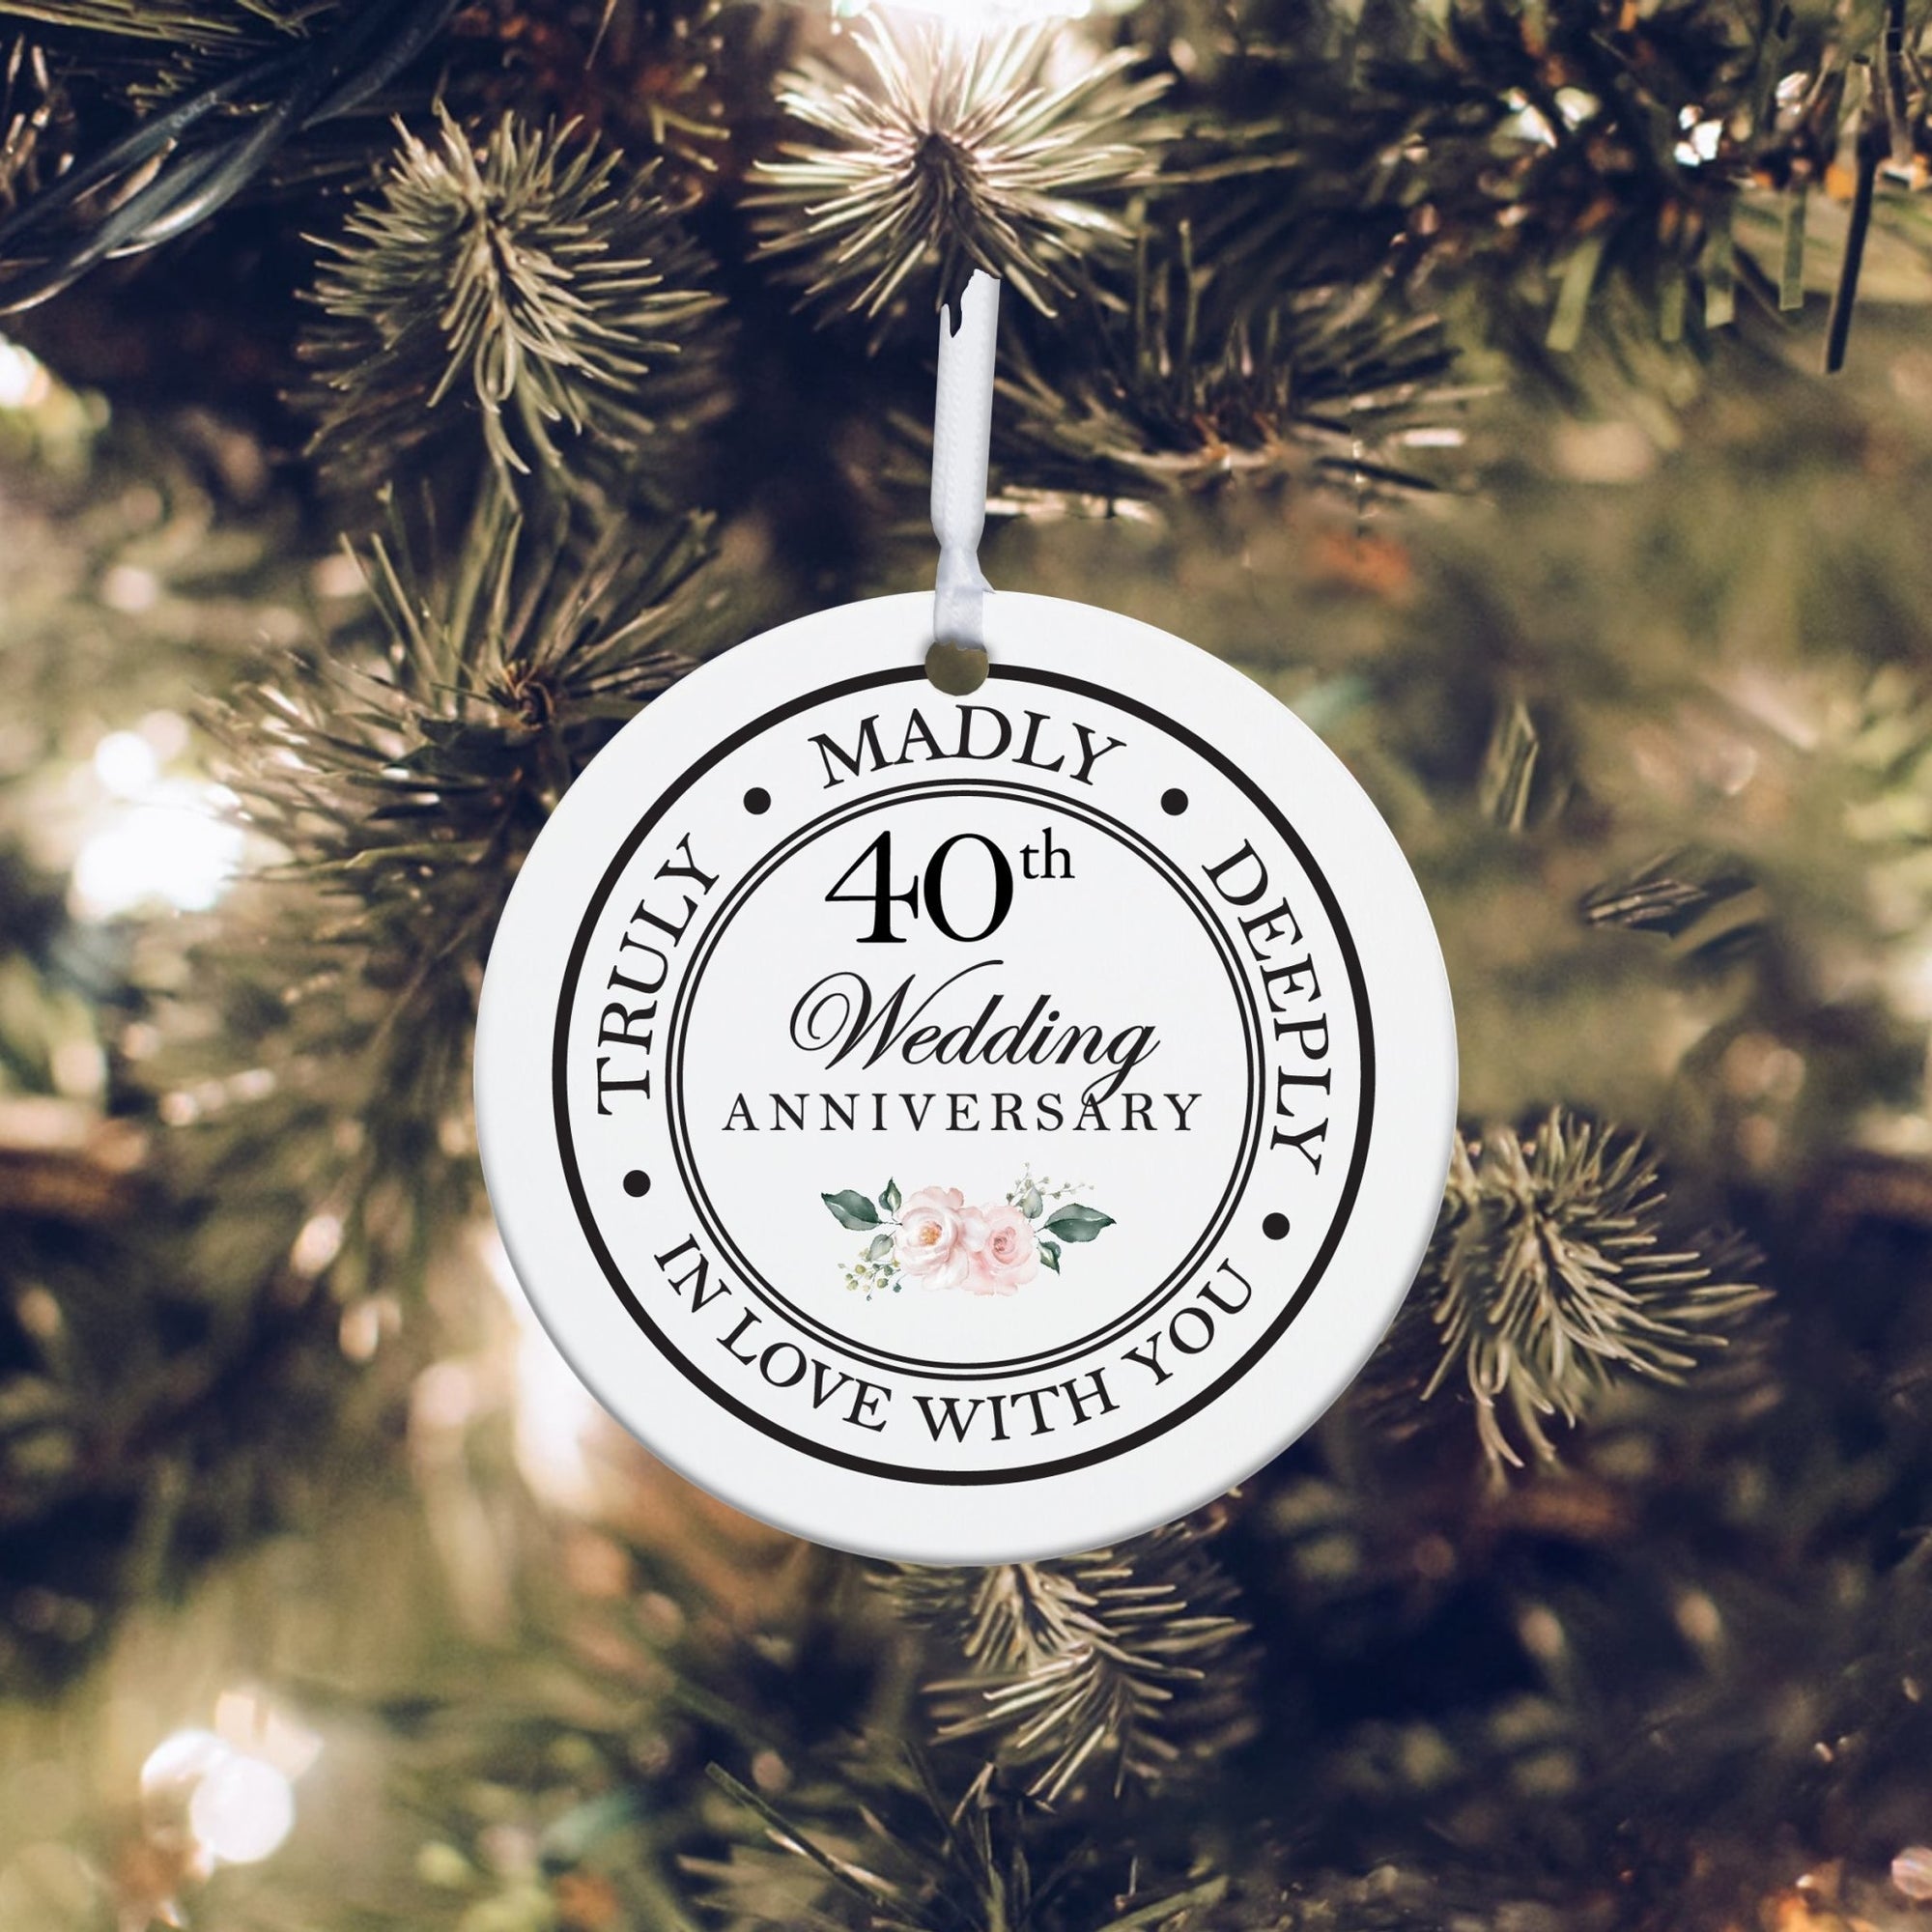 40th Wedding Anniversary White Ornament With Inspirational Message Gift Ideas - Truly, Madly, Deeply In Love With You - LifeSong Milestones